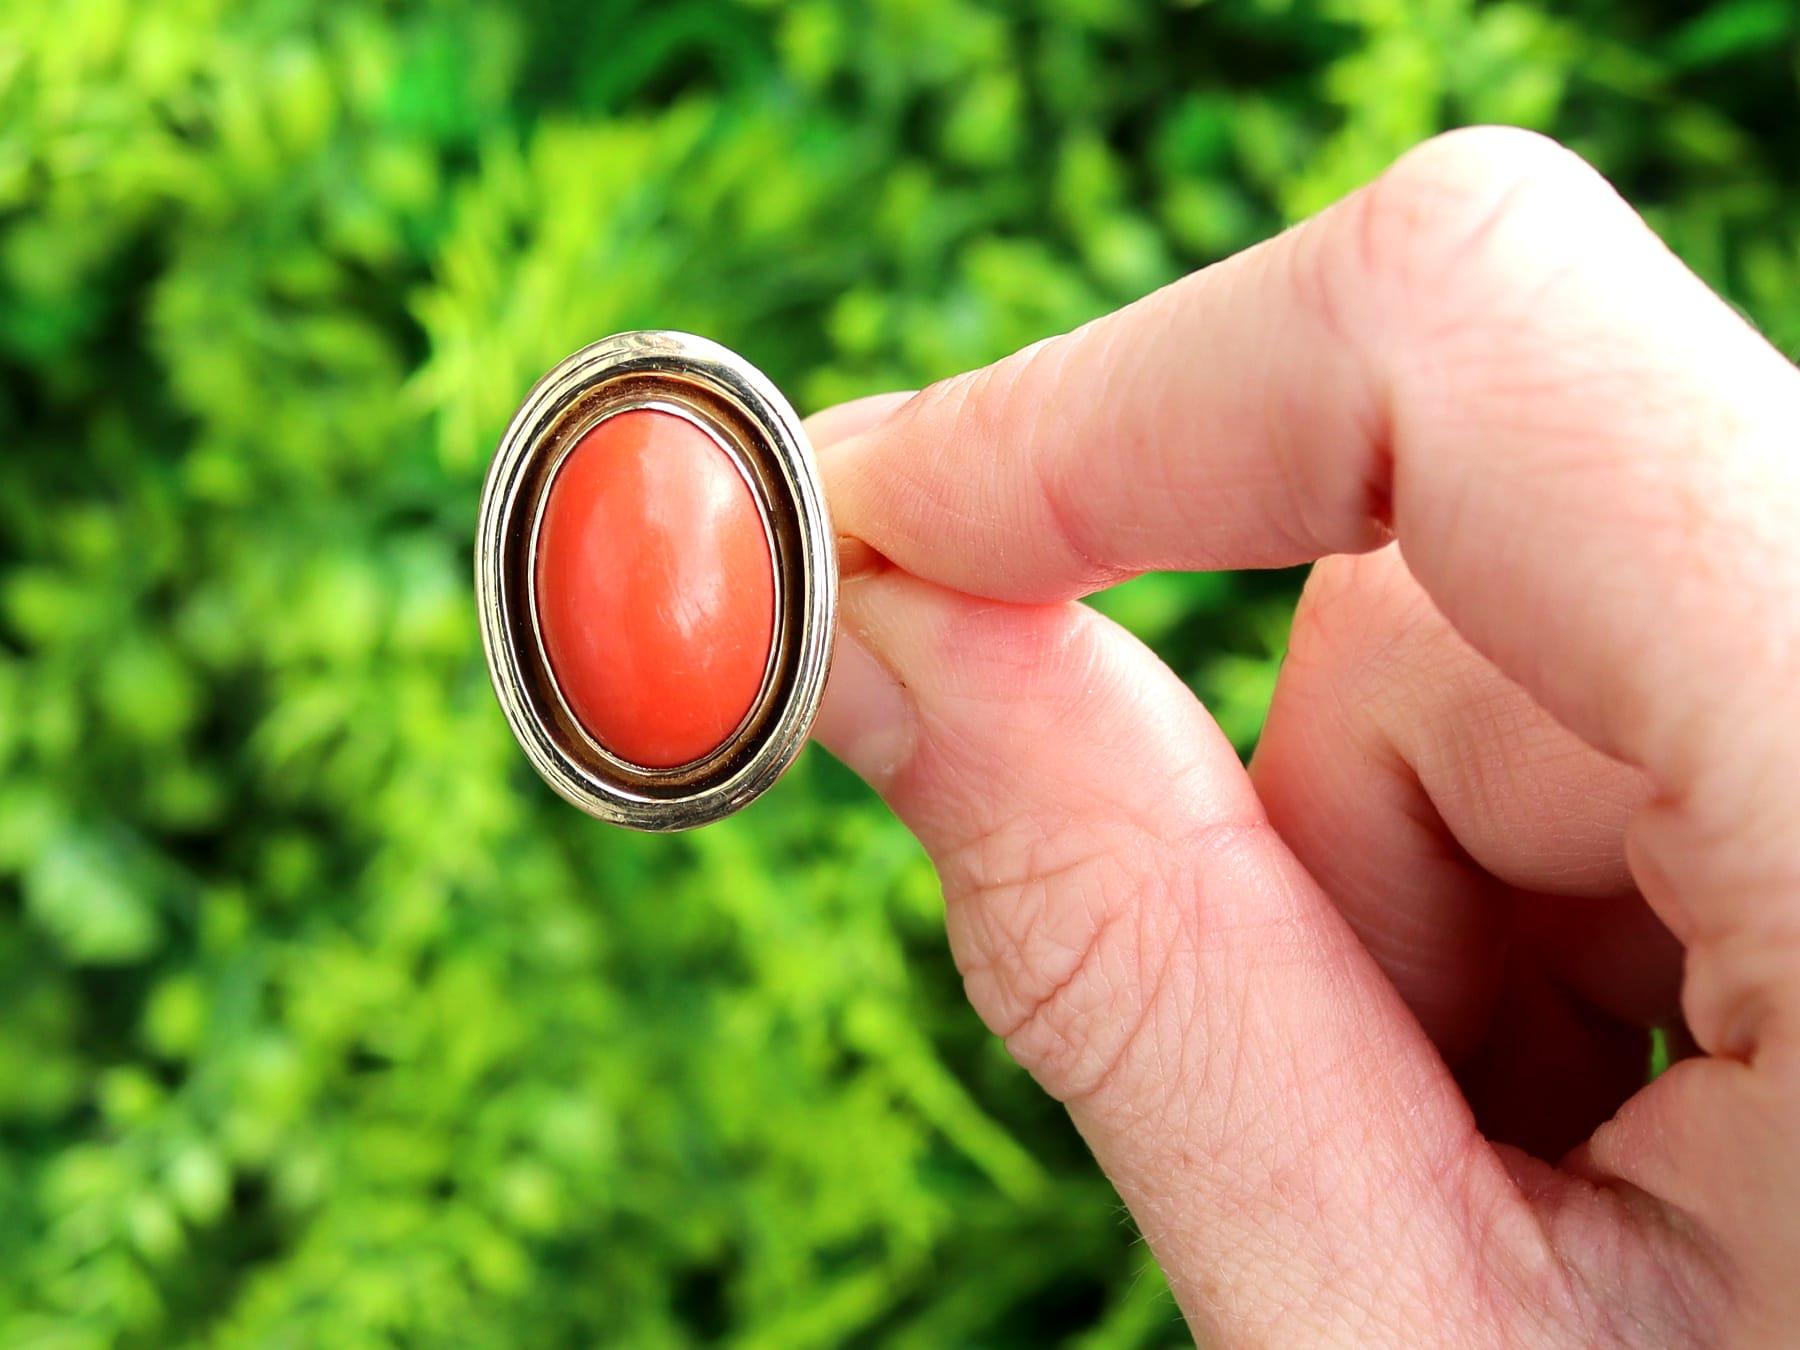 A fine and impressive 14 karat yellow gold vintage coral cocktail ring; part of our diverse vintage jewelry and estate jewelry collections.

This fine and impressive vintage cabochon cut coral ring has been crafted in 14k yellow gold.

The ring